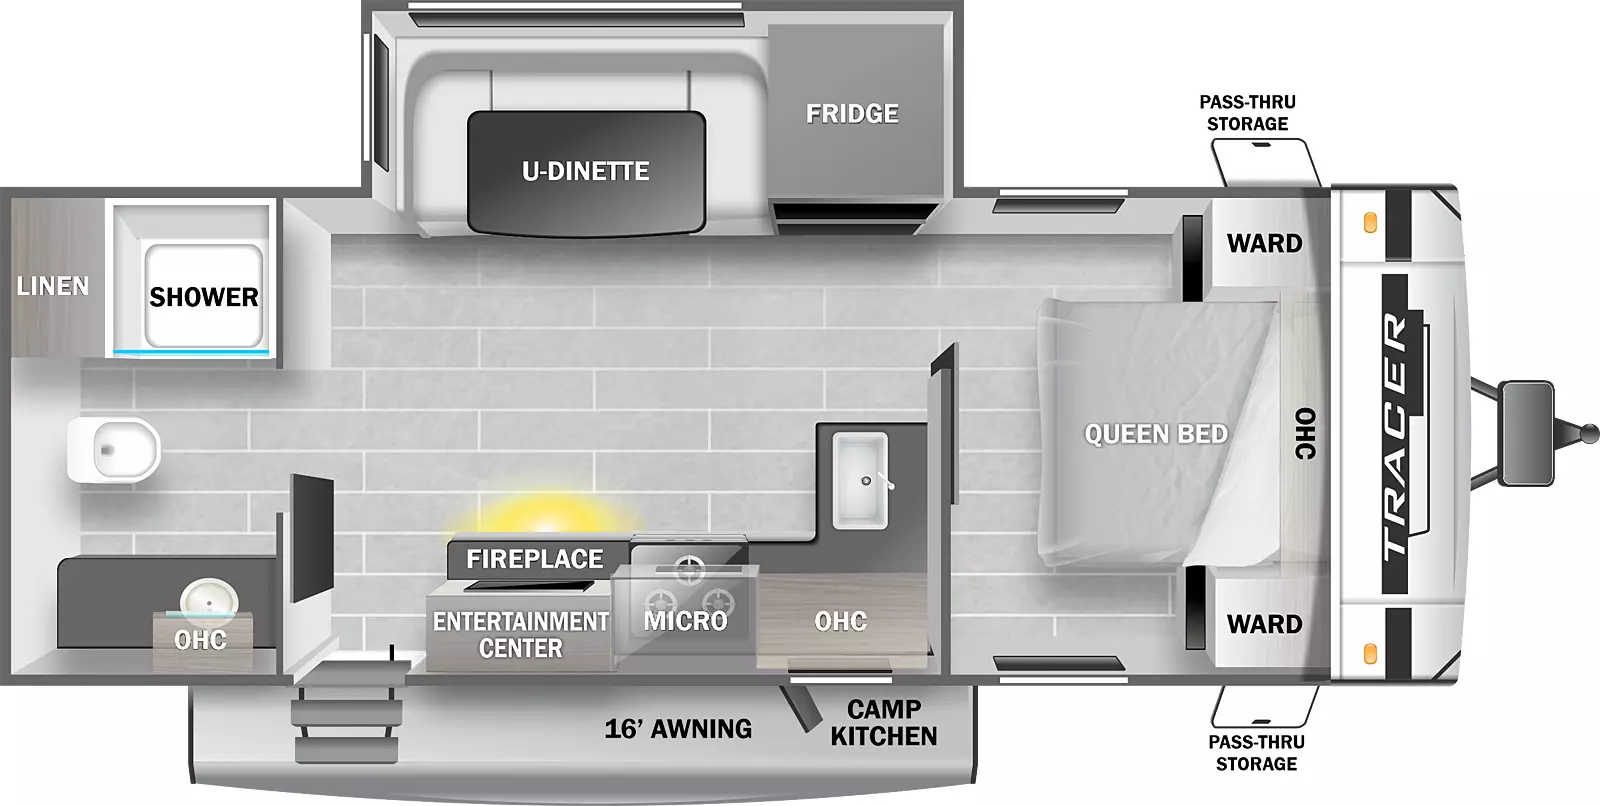 The Tracer 23RBS floorplan has one entry door, one slideout on the off door side, a camp kitchen, front passthrough storage, and a sixteen foot awning. Interior layout from front to back: front queen bed with wardrobes on either side and overhead cabinets; exit bedroom on off-door side to slideout with refrigerator and u-dinette; door side kitchen with l-shape countertop with sink, stove, overhead cabinets, microwave, entertainment center and fireplace below next to the entry steps; rear bathroom with shower, linen closet, sink, overhead cabinet and commode.